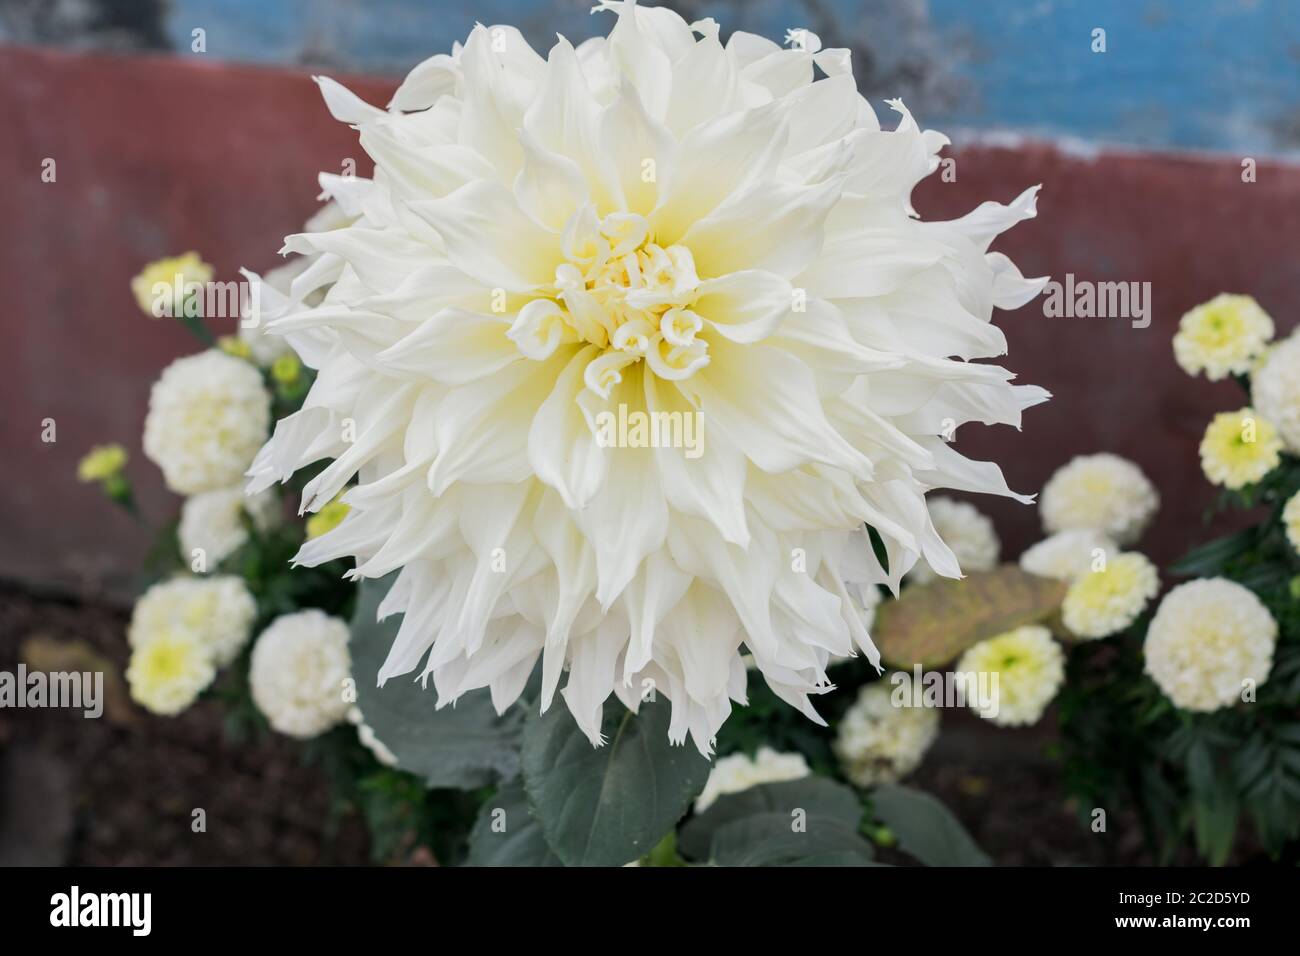 White Guldavari Flower plant, a herbaceous perennial plants. It is a sun loving plant Blooms in early spring to late summer. A very popular flower for Stock Photo